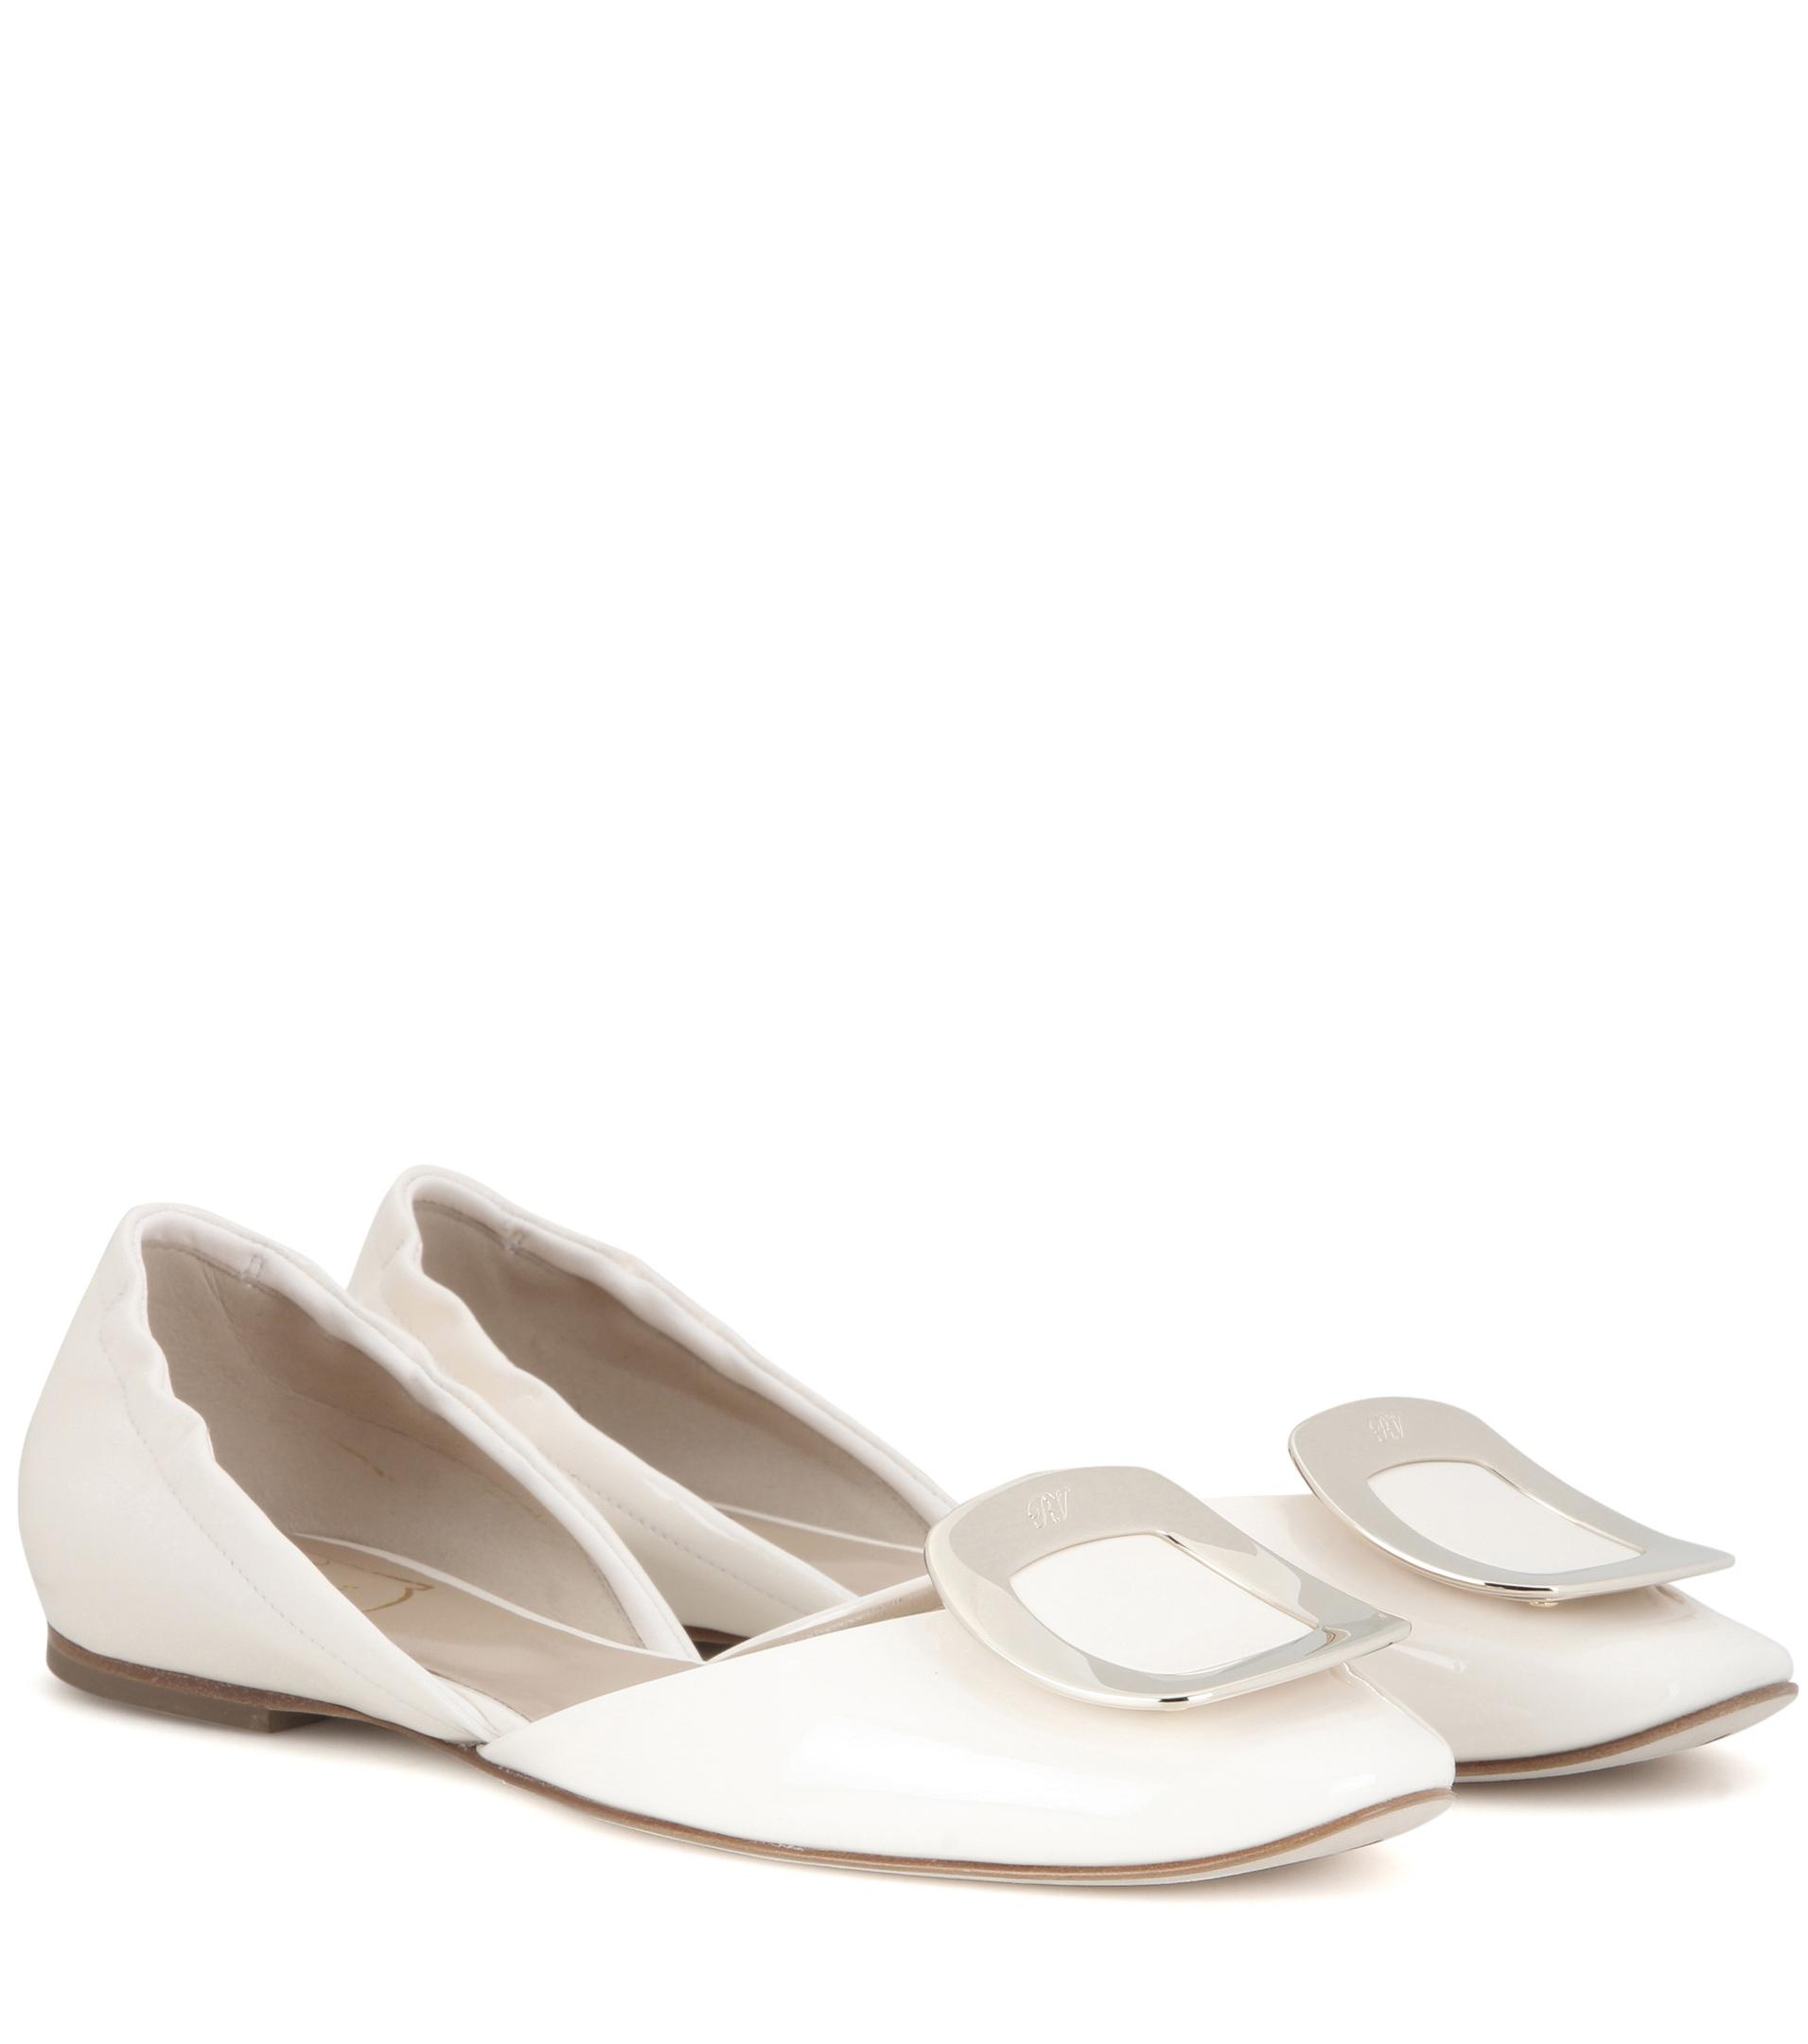 Lyst - Roger Vivier Chips Patent Leather Ballerinas in White